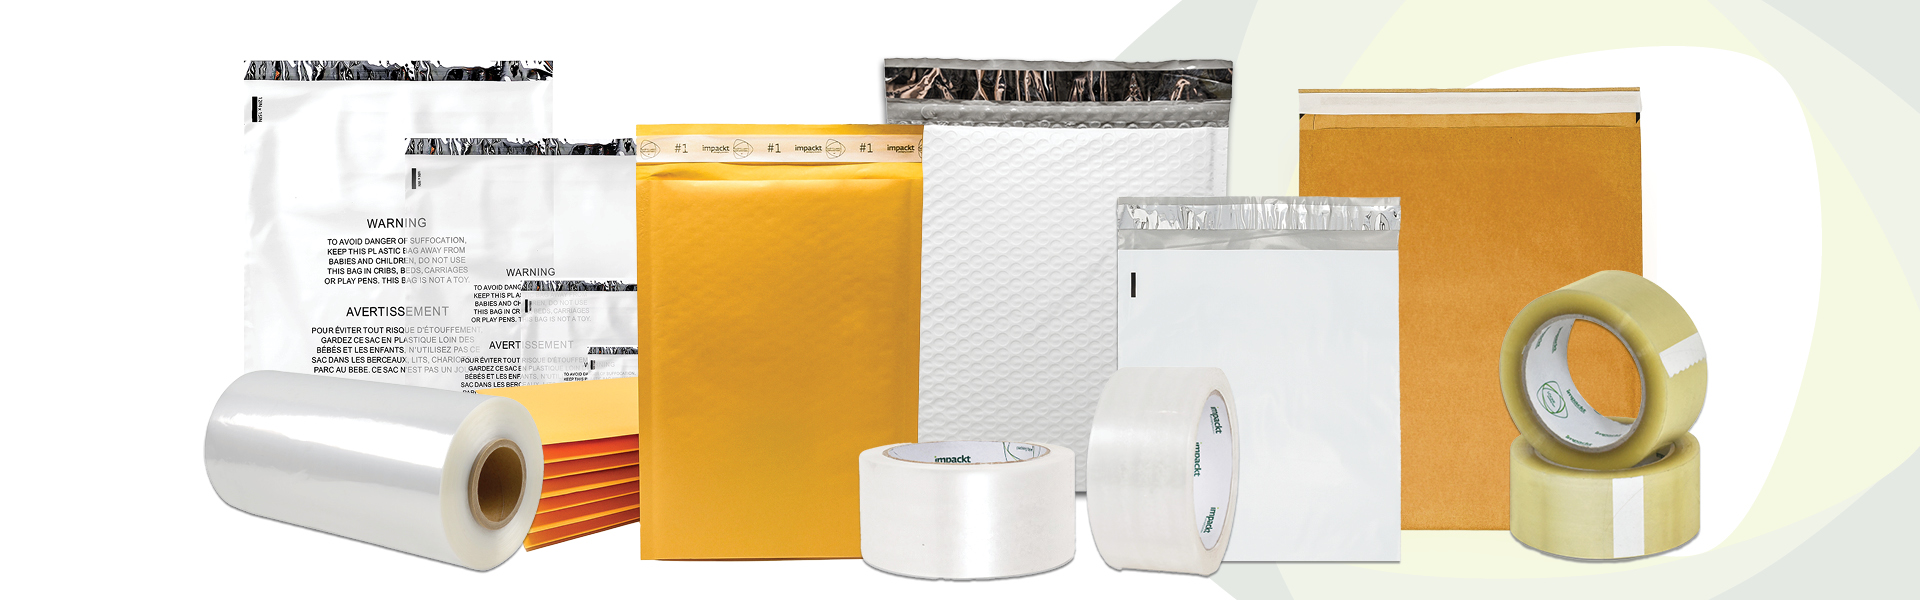 Shows a variety of products offered by Impackt Packaging Solutions including: mailers, tape, bags and wrap